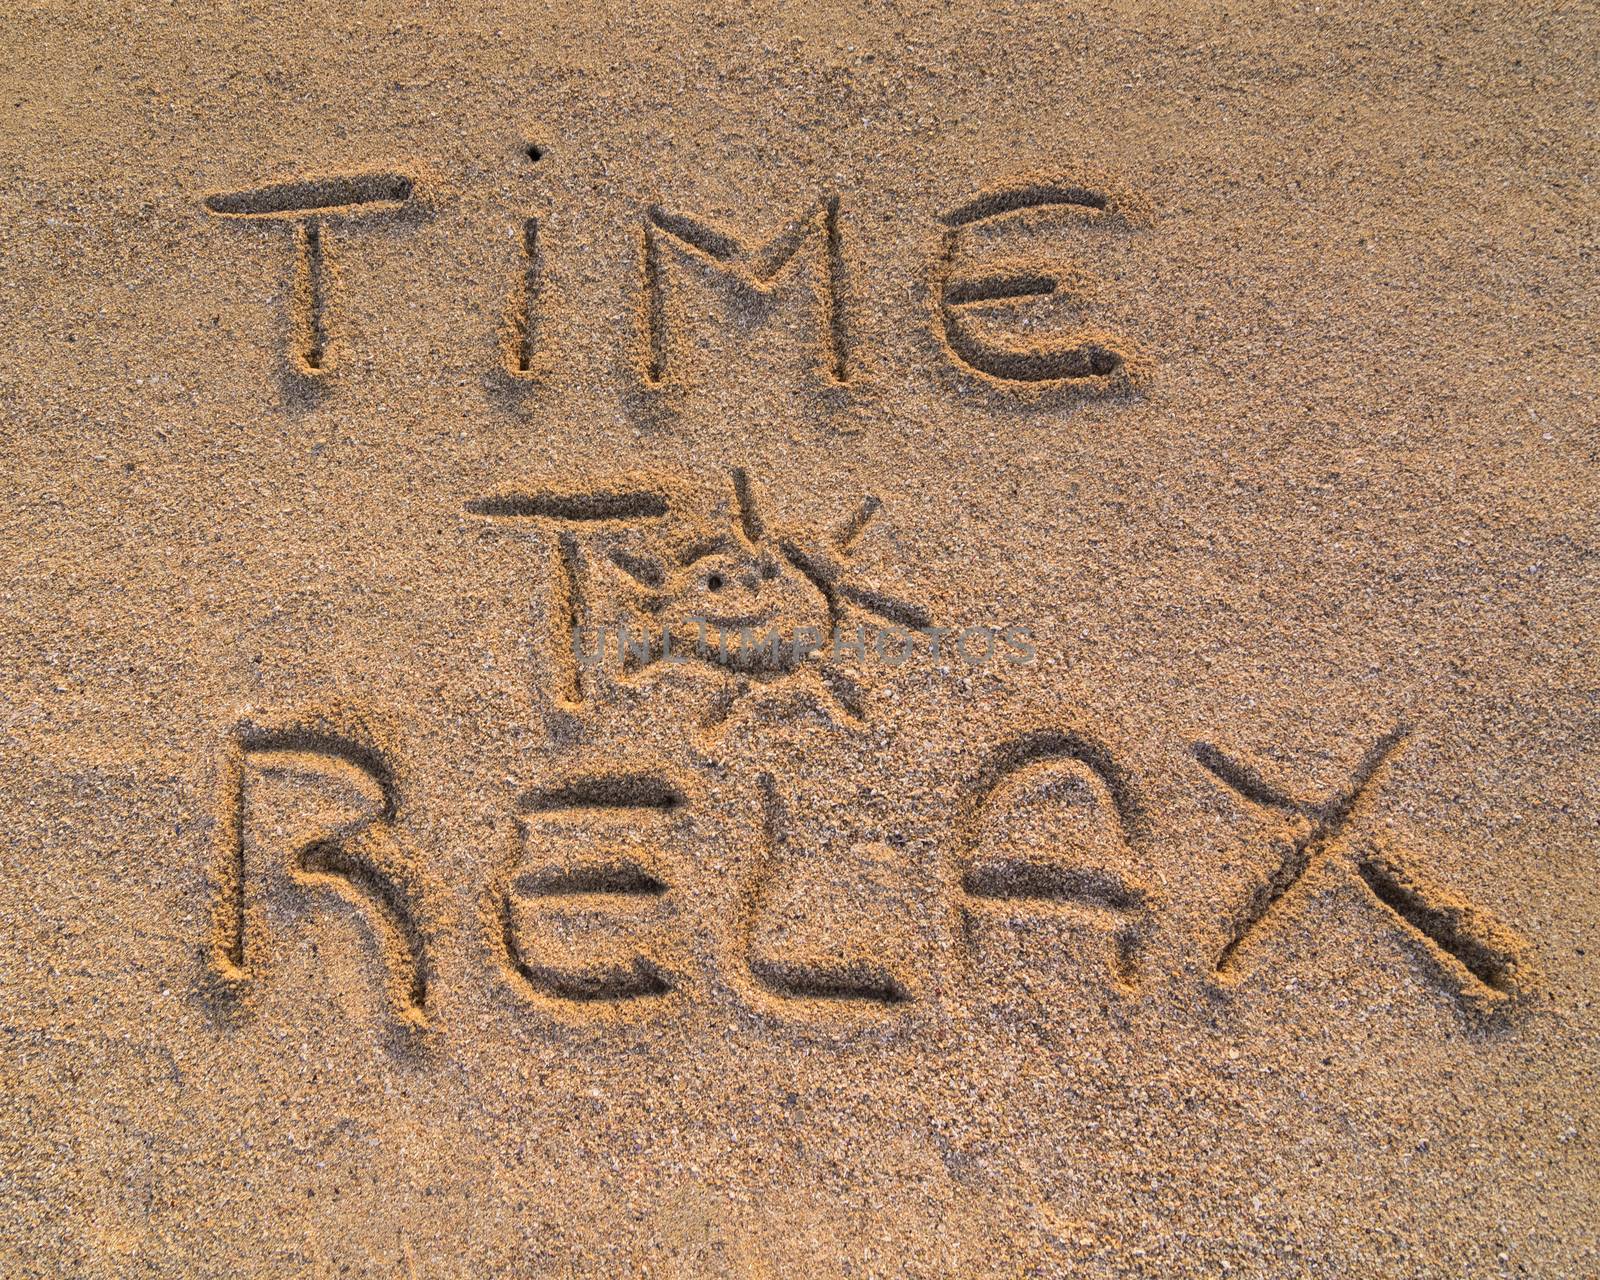 Time to relax sign by Robertobinetti70